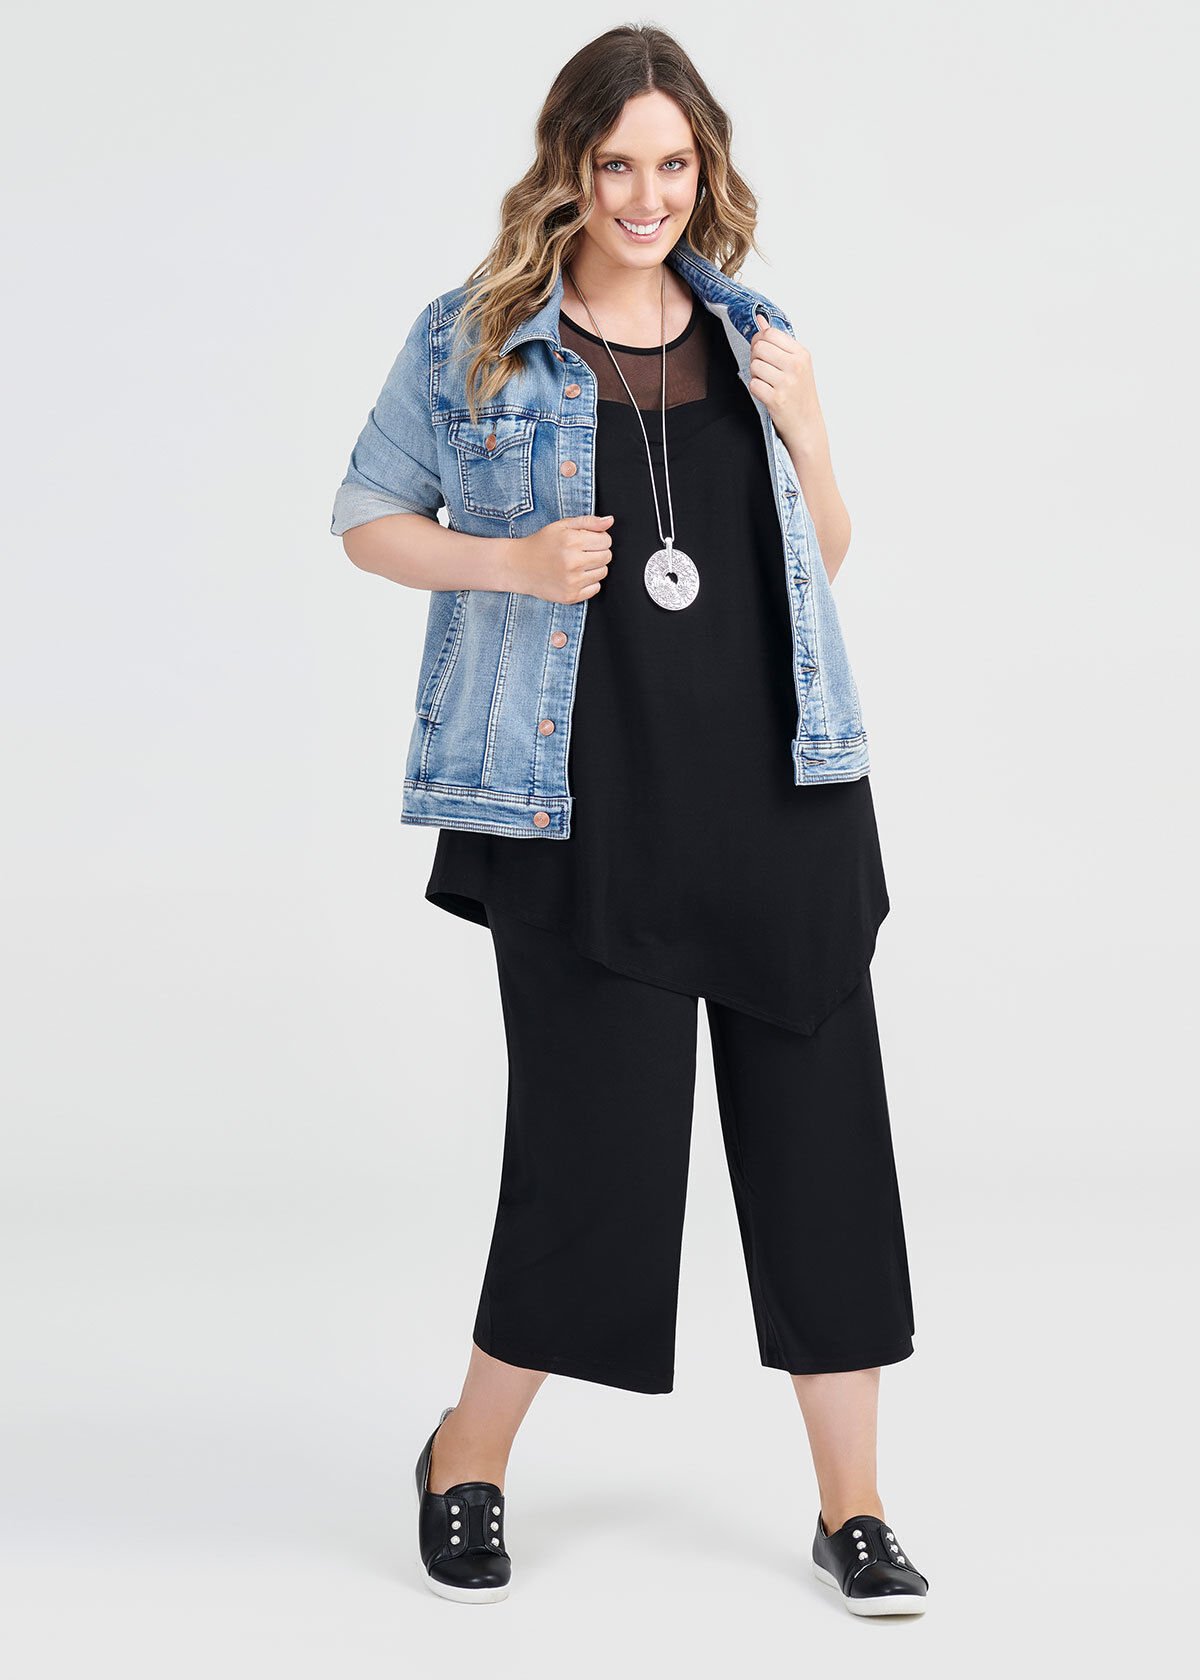 The Best Women's Work Pants for Every Body Type - PureWow